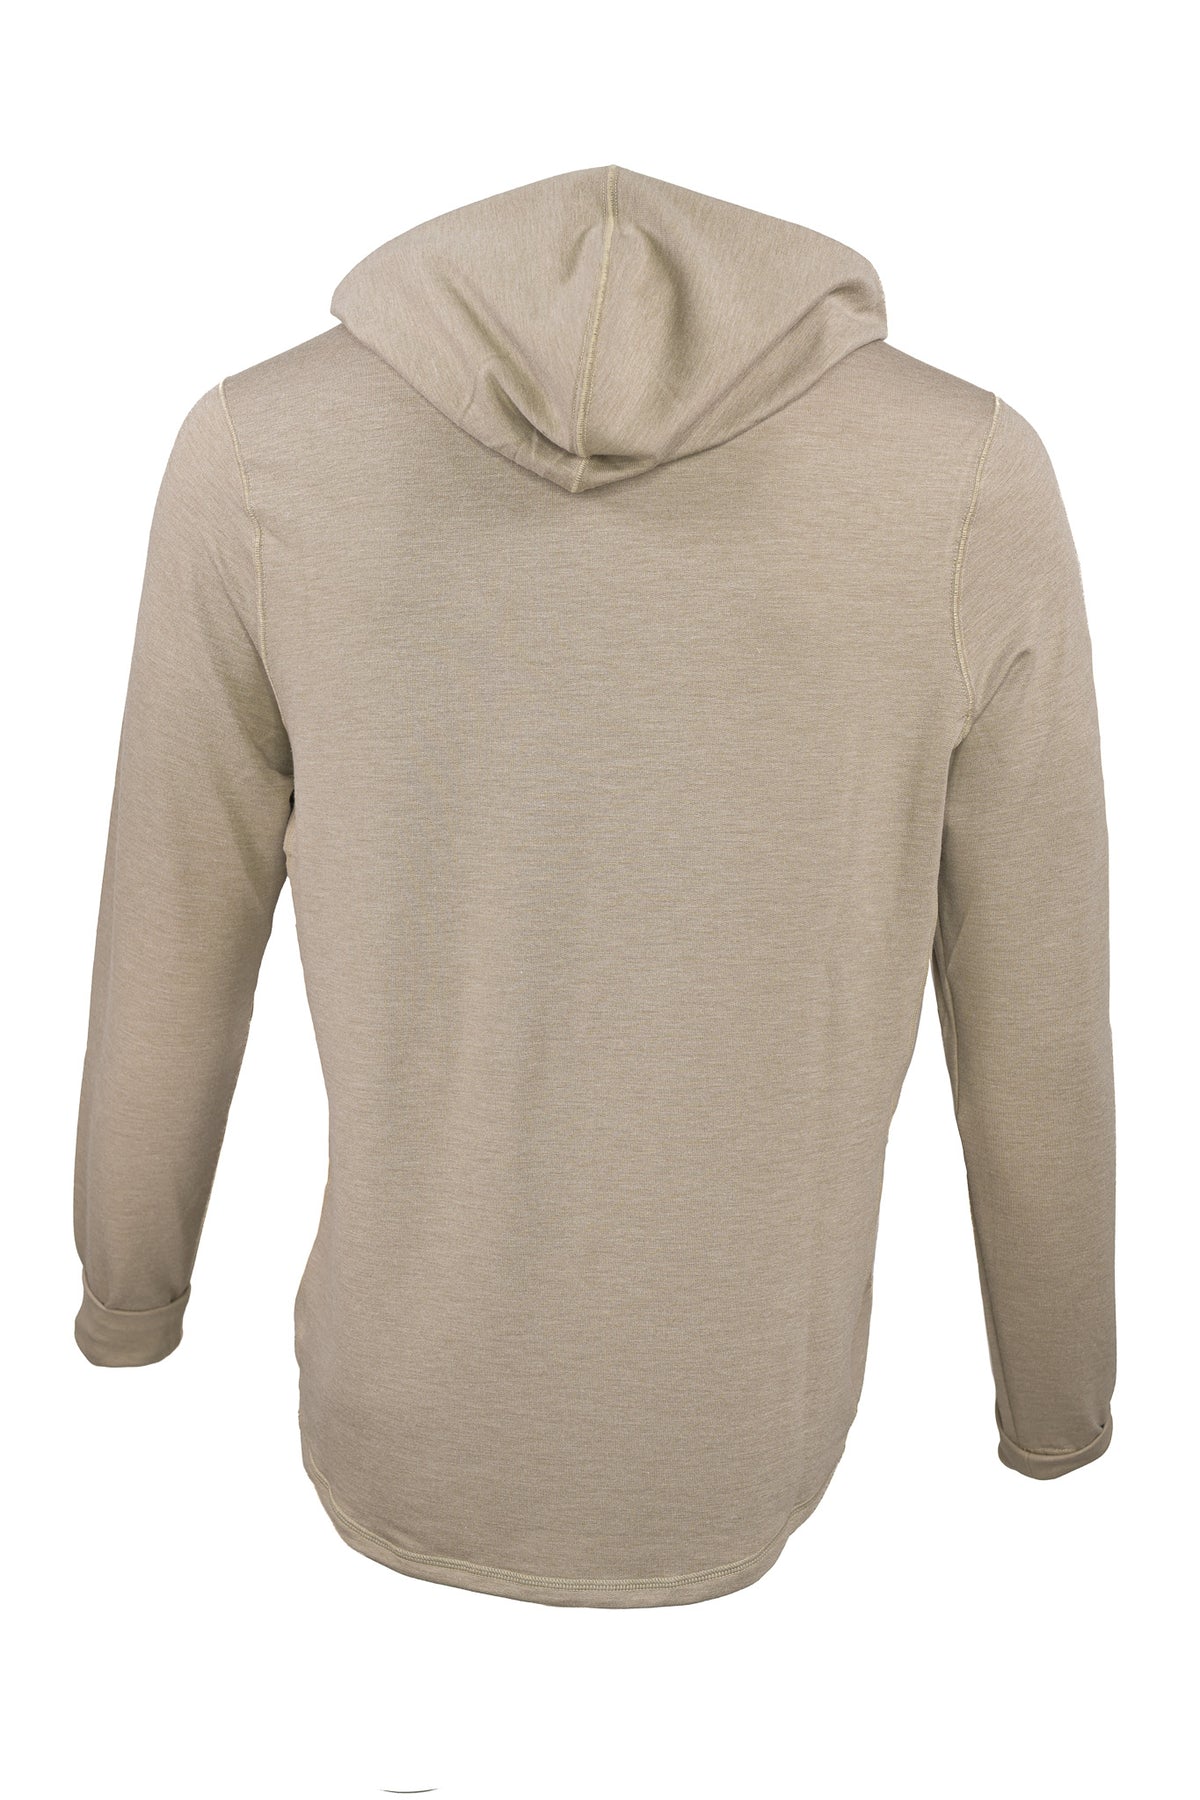 Toes on the Nose Seasilk Hooded T-Shirt Sand